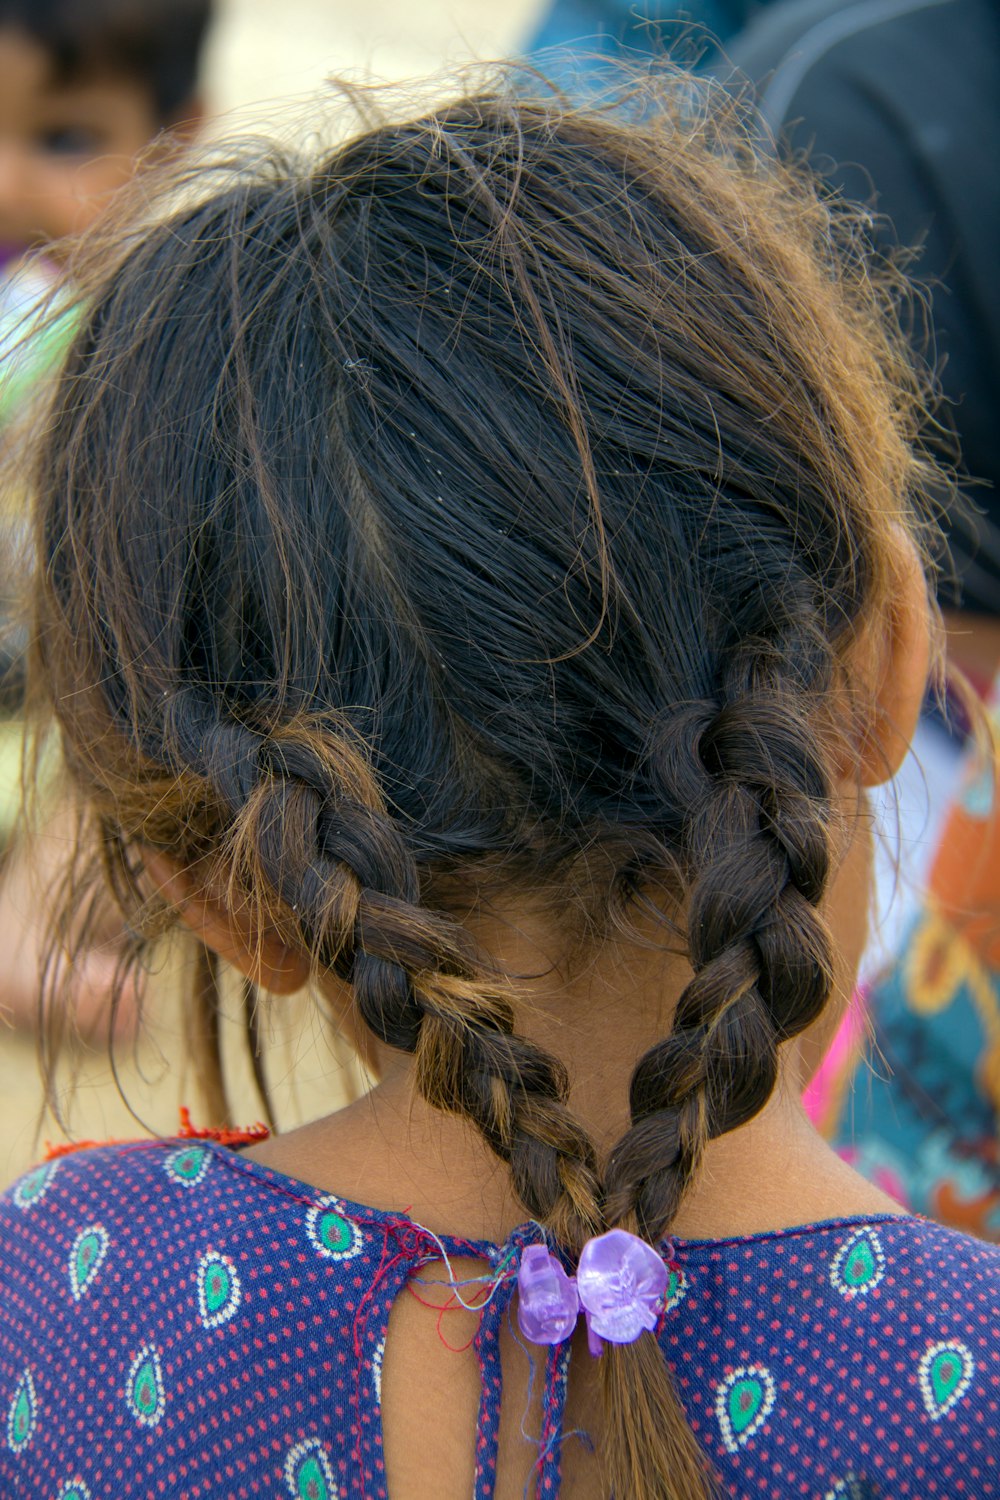 woman in multicolored dress with braided hair